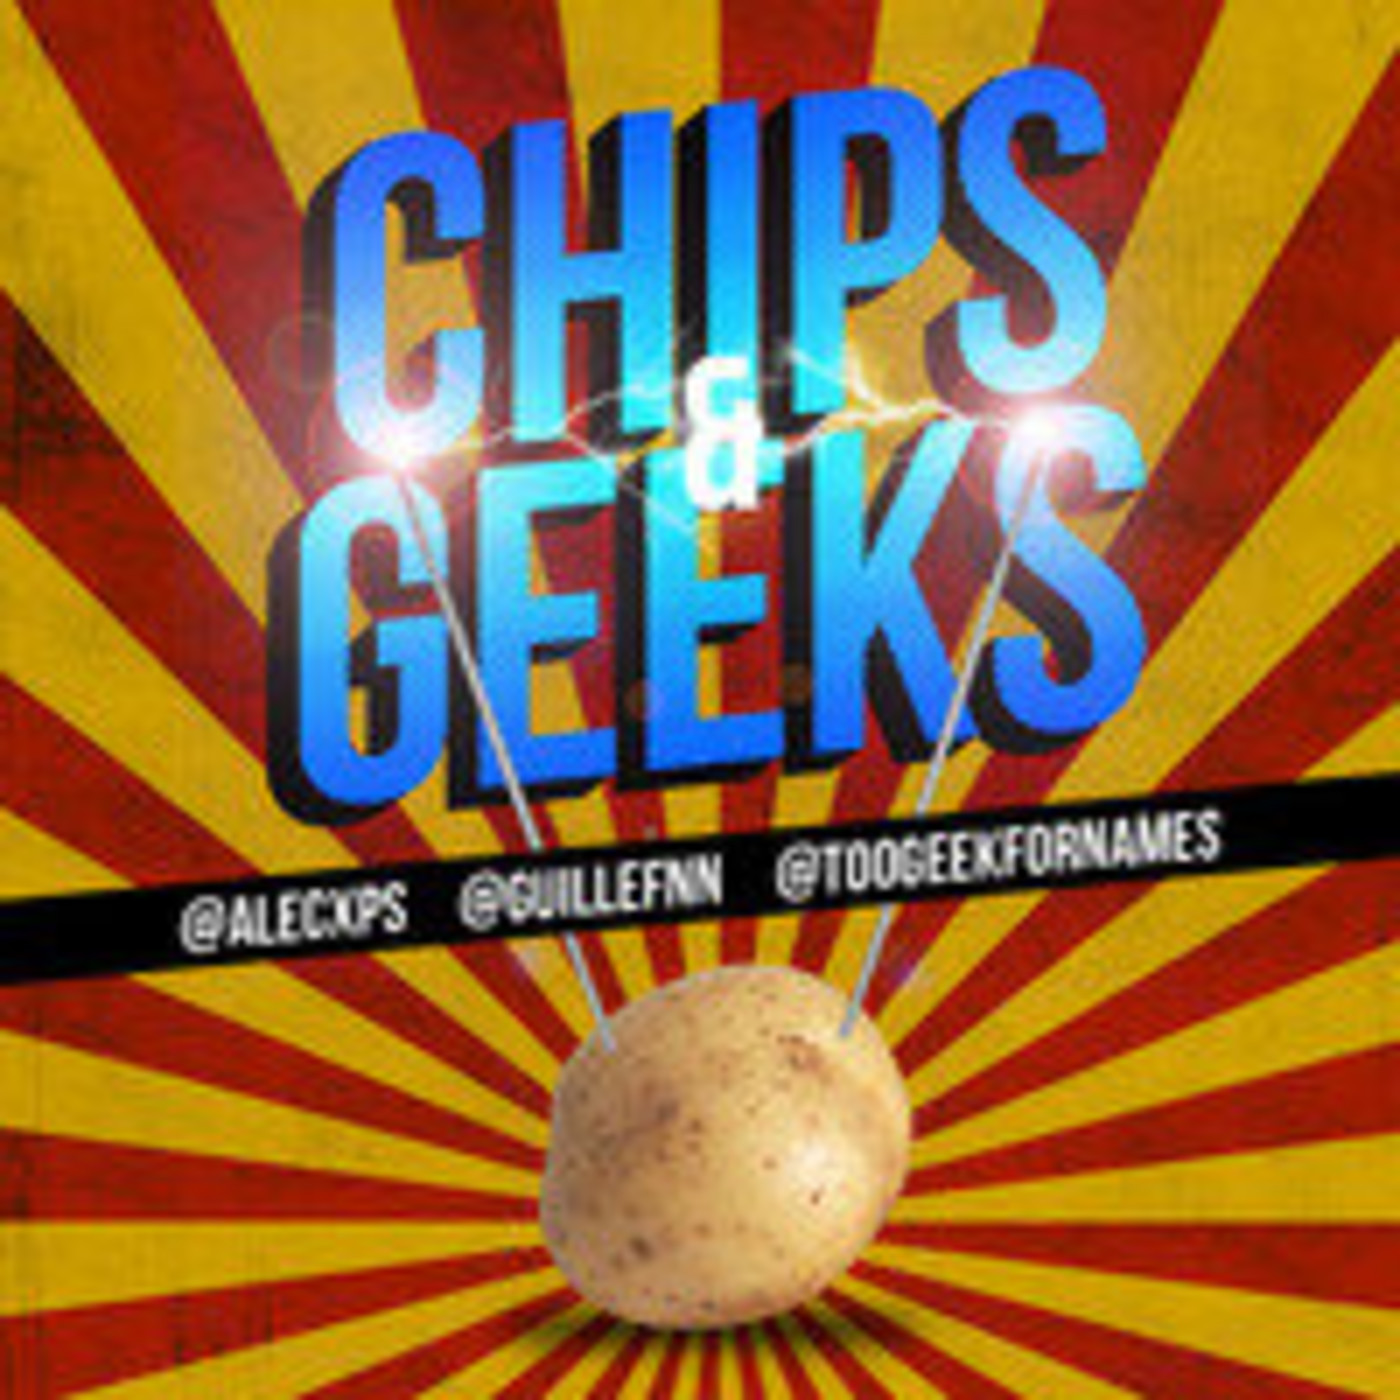 Podcast Chips & Geeks